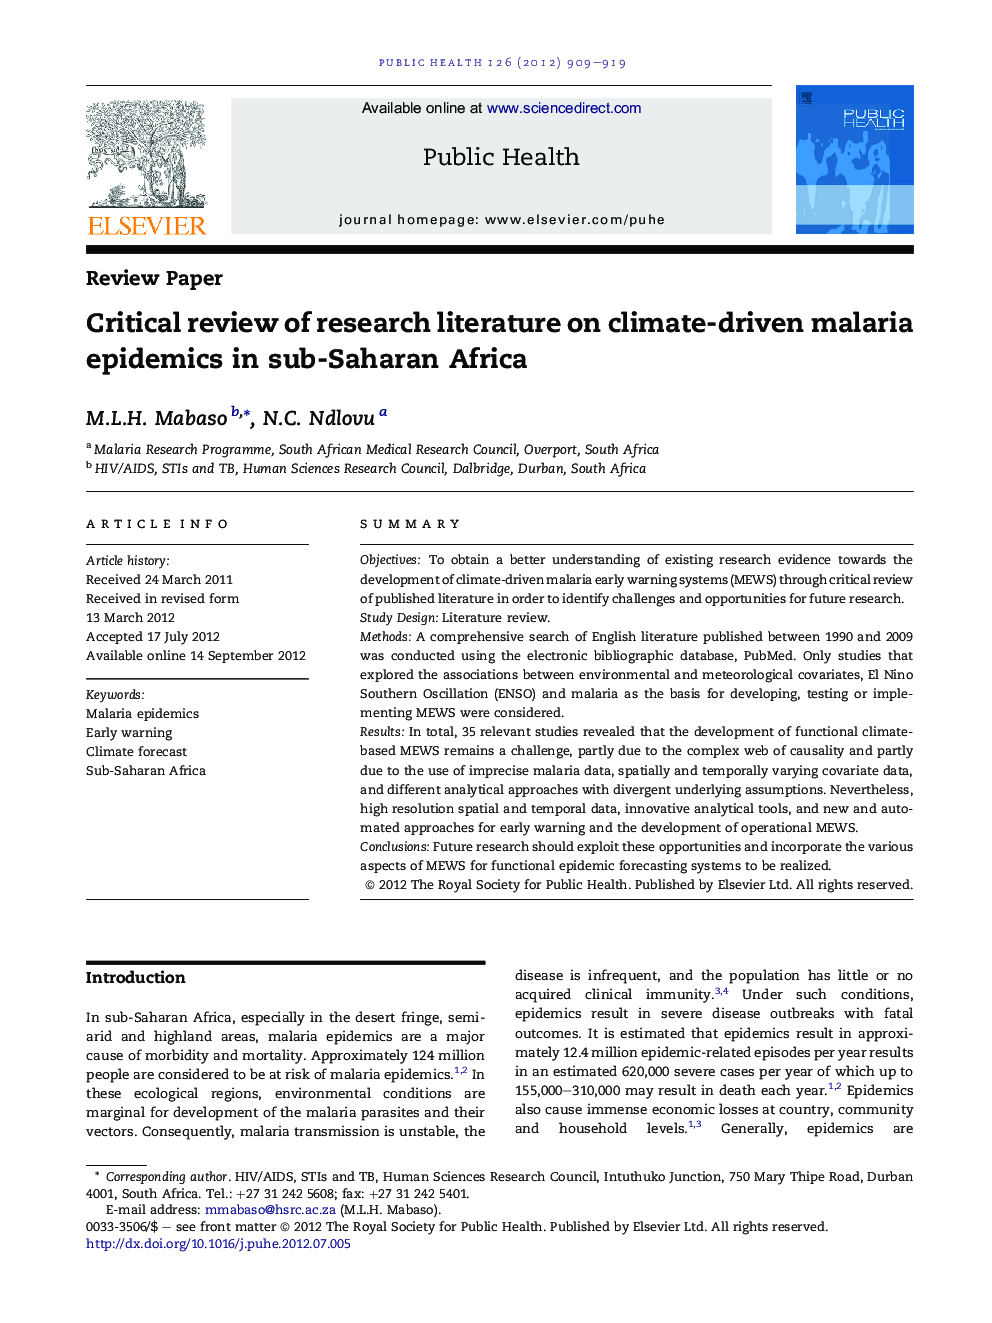 Critical review of research literature on climate-driven malaria epidemics in sub-Saharan Africa